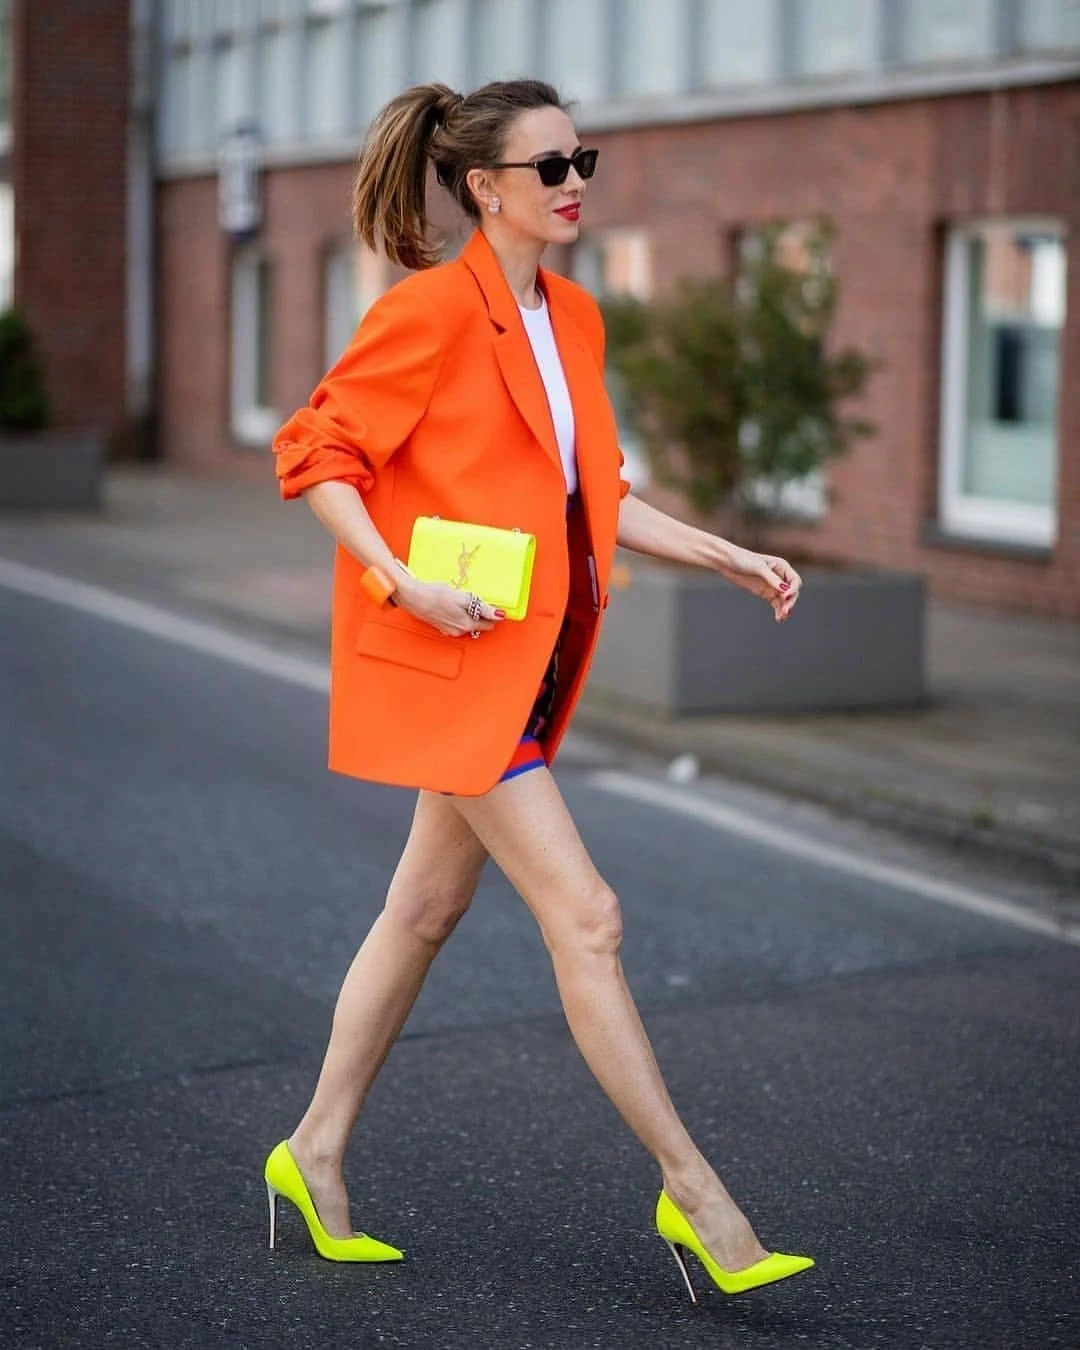 Style guide: How to wear orange. | Melody Jacob